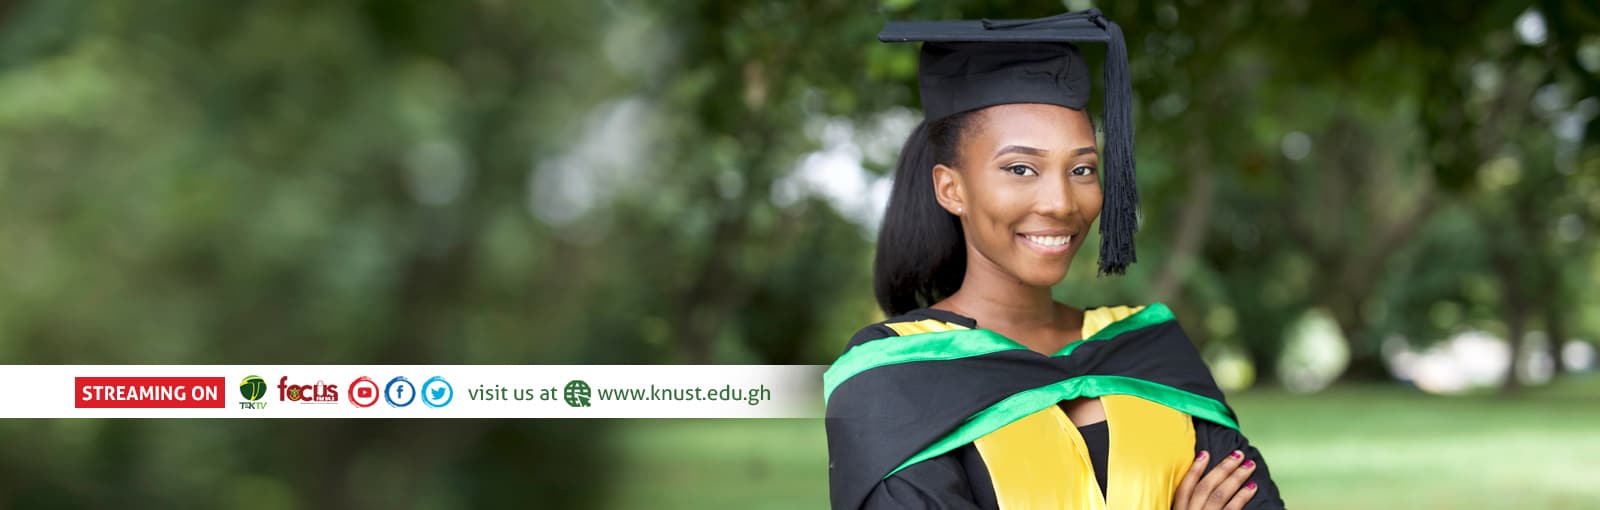 KNUST Graduation List 2021 - Name of Students Graduating This Year